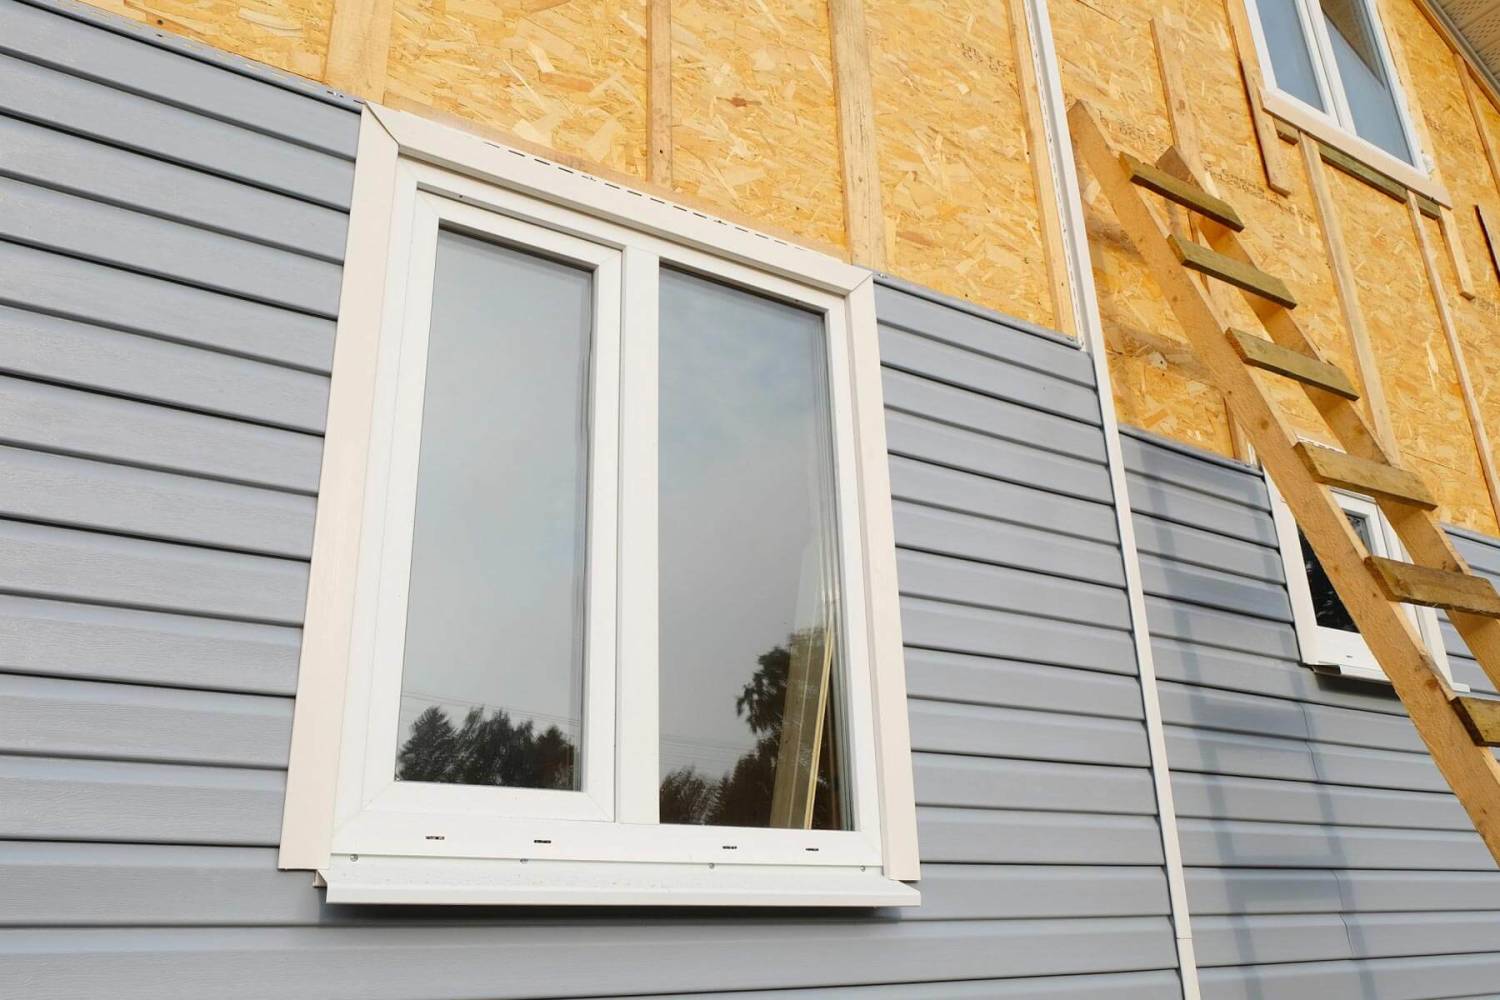 How To Remove Siding And Repair Exterior Wall Sheathing